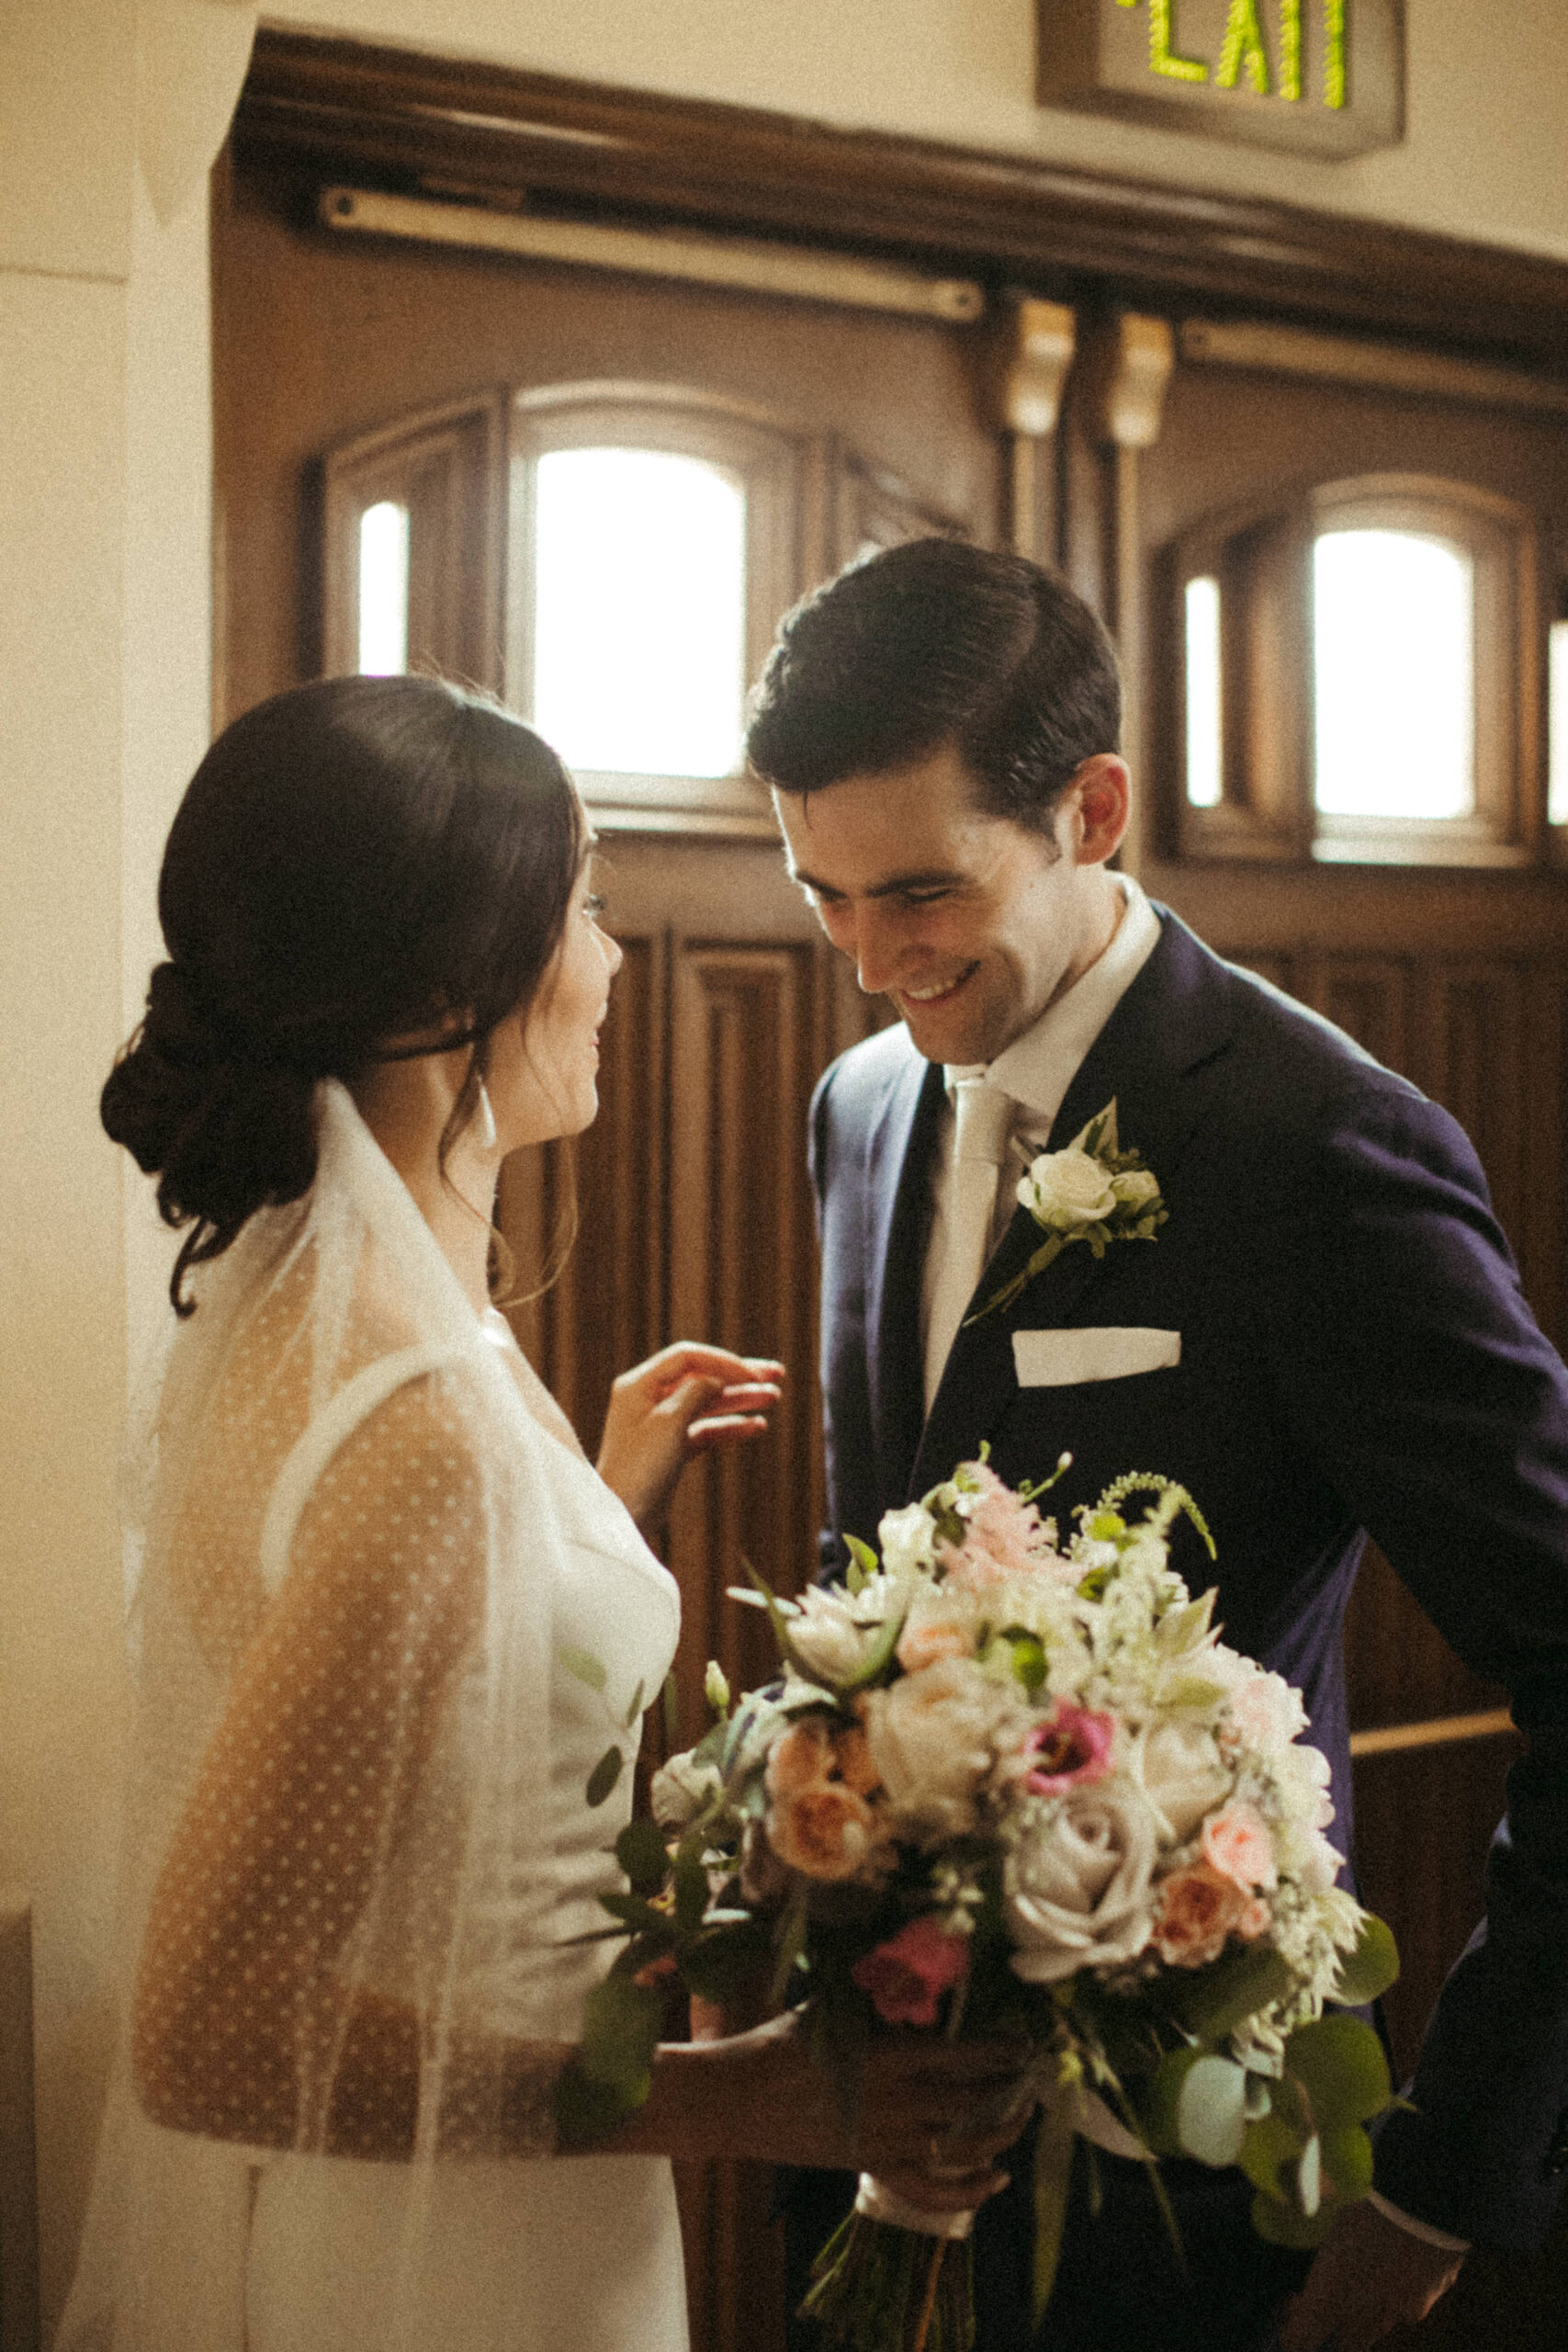 Stunning bride and groom share a laugh as they exit their dreamy Long Island church wedding